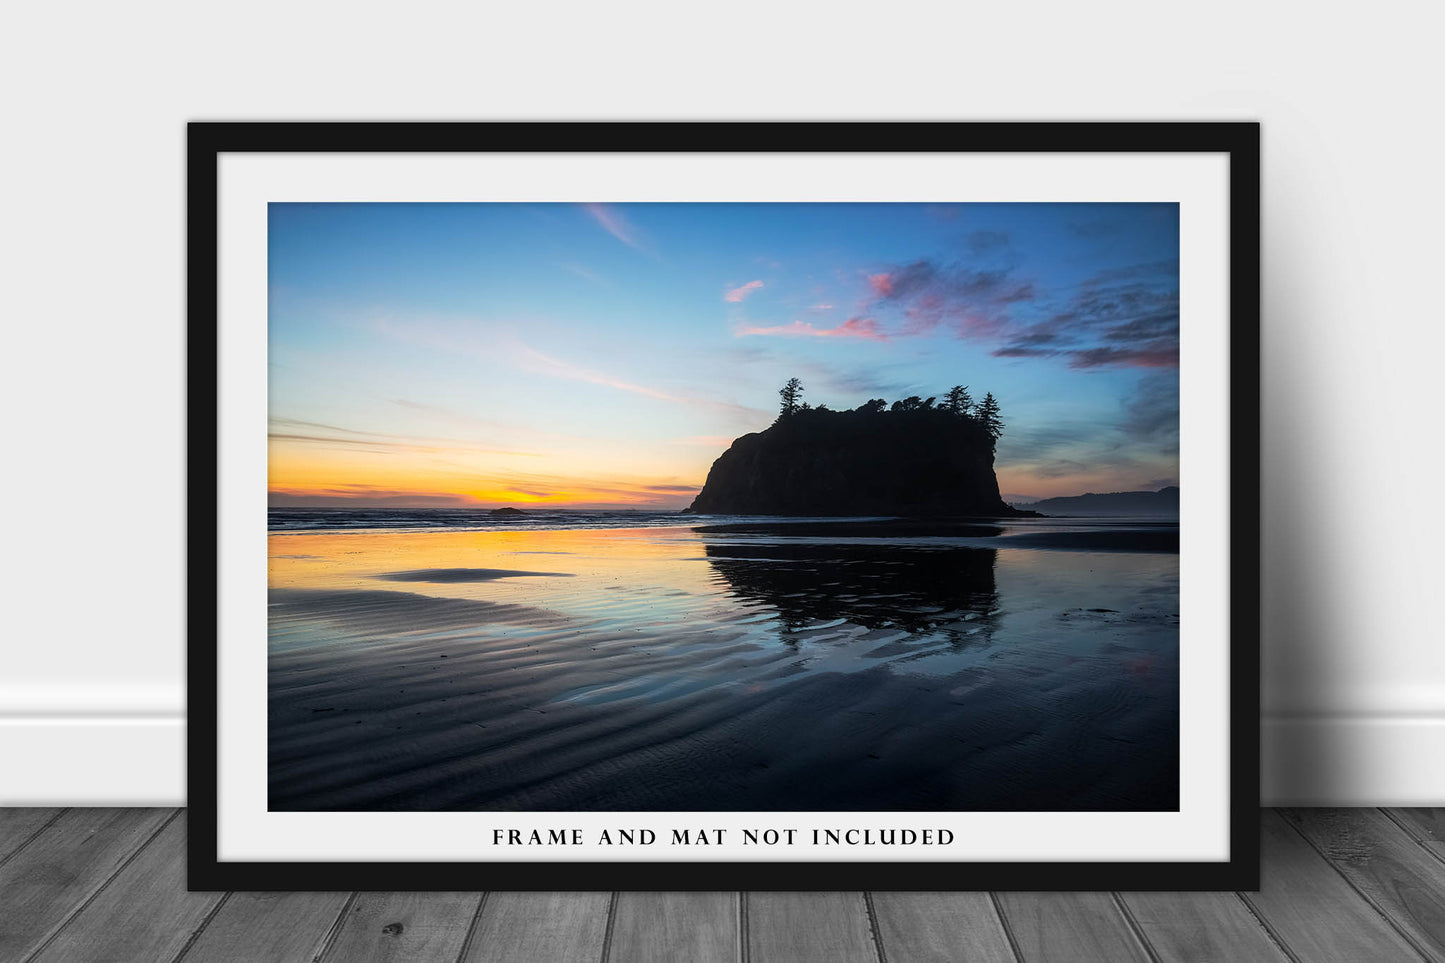 Pacific Northwest Photography Print (Not Framed) Picture of Sea Stack at Sunset at Ruby Beach Washington Seascape Wall Art Coastal Decor